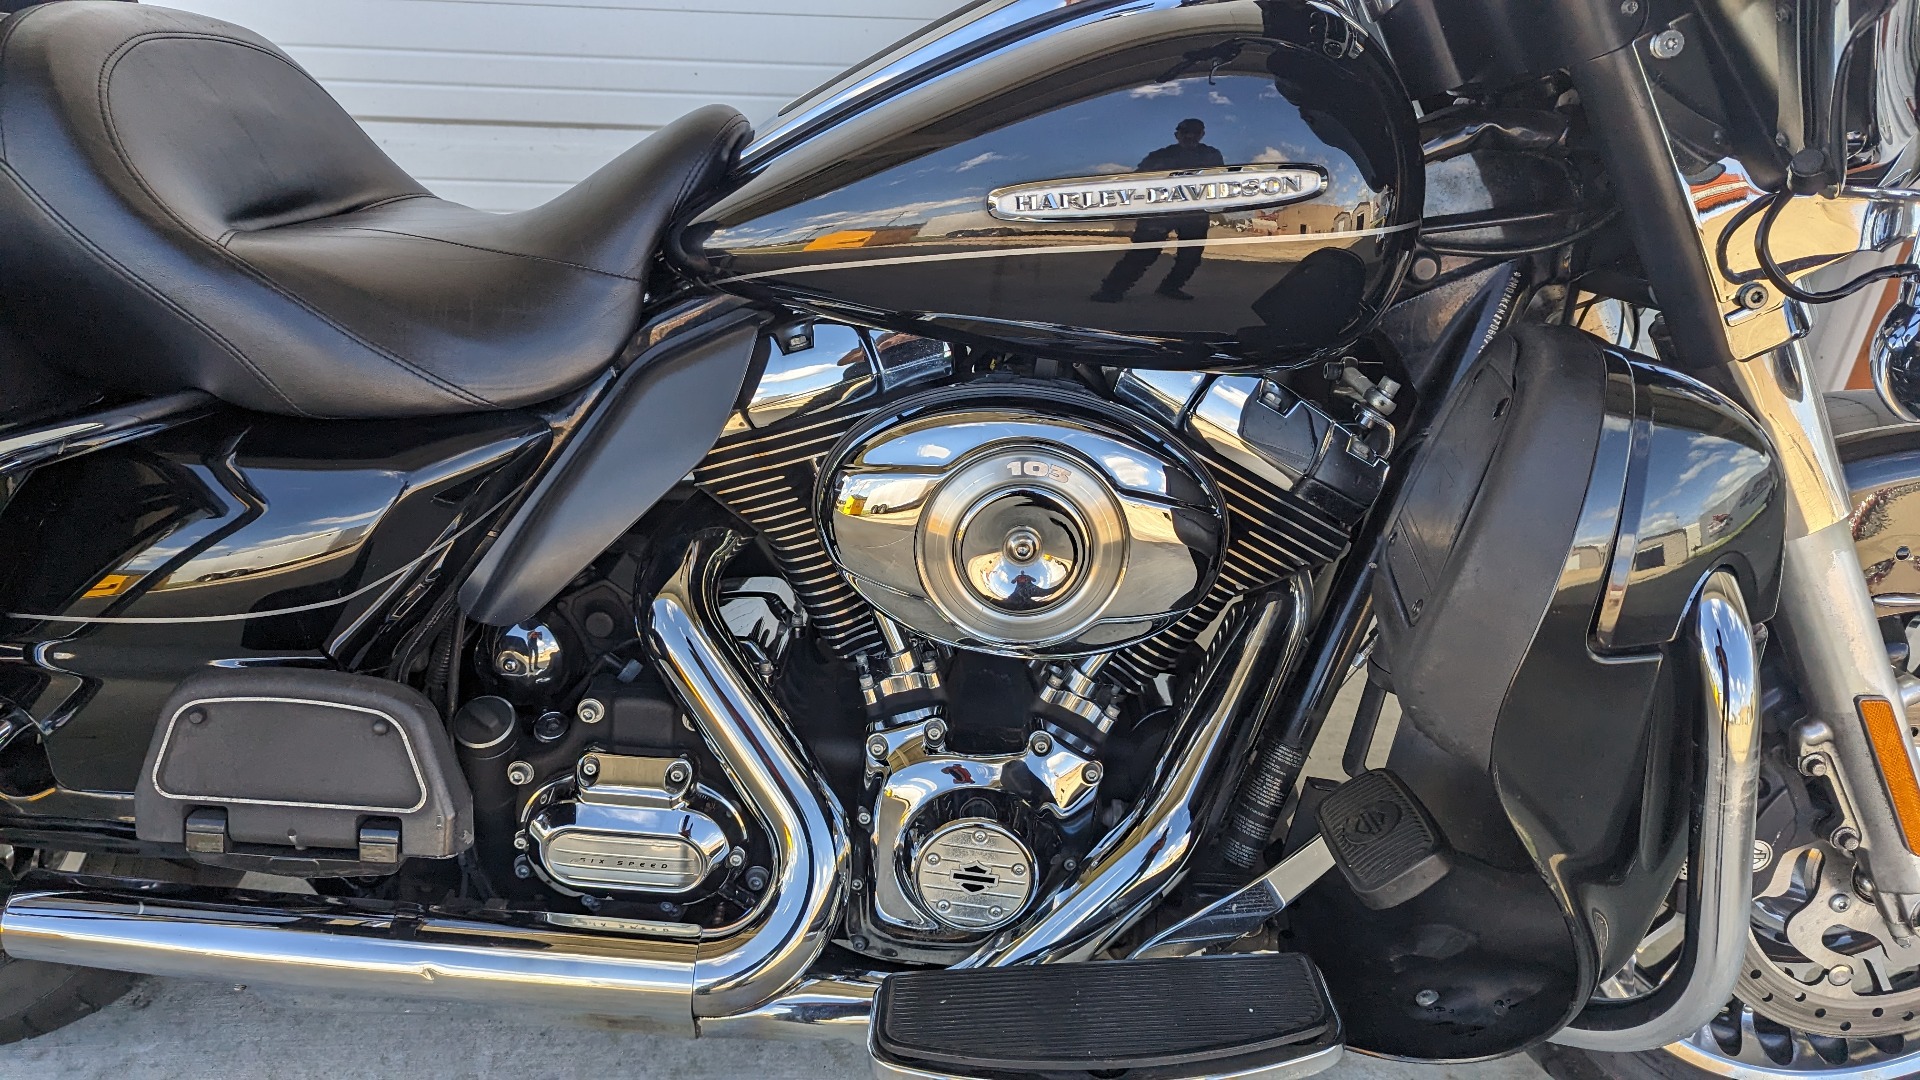 2013 Harley-Davidson Electra Glide Ultra Limited for sale in texas - Photo 4